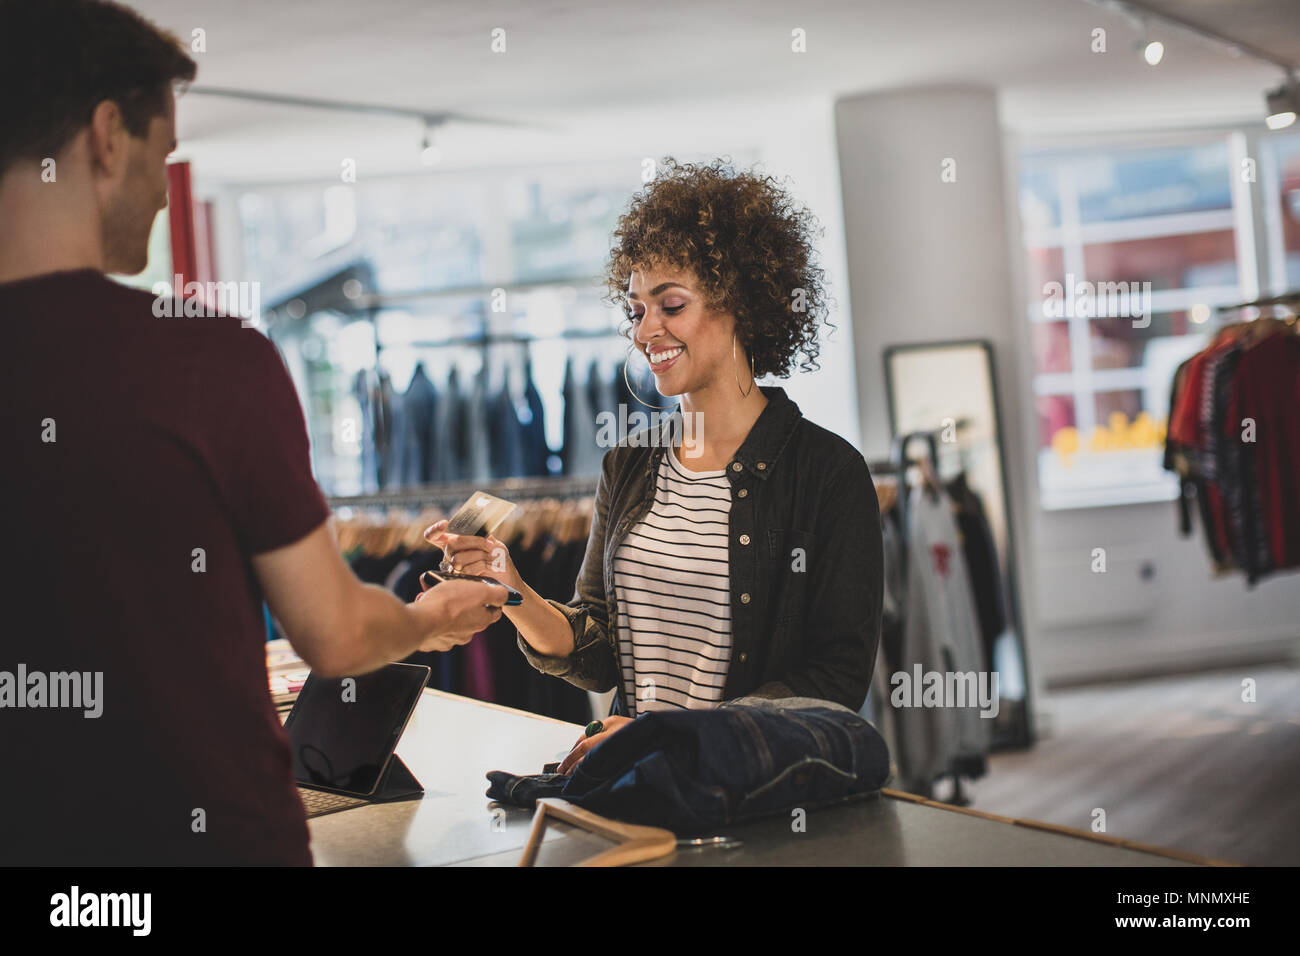 Customer paying for clothes at checkout Stock Photo